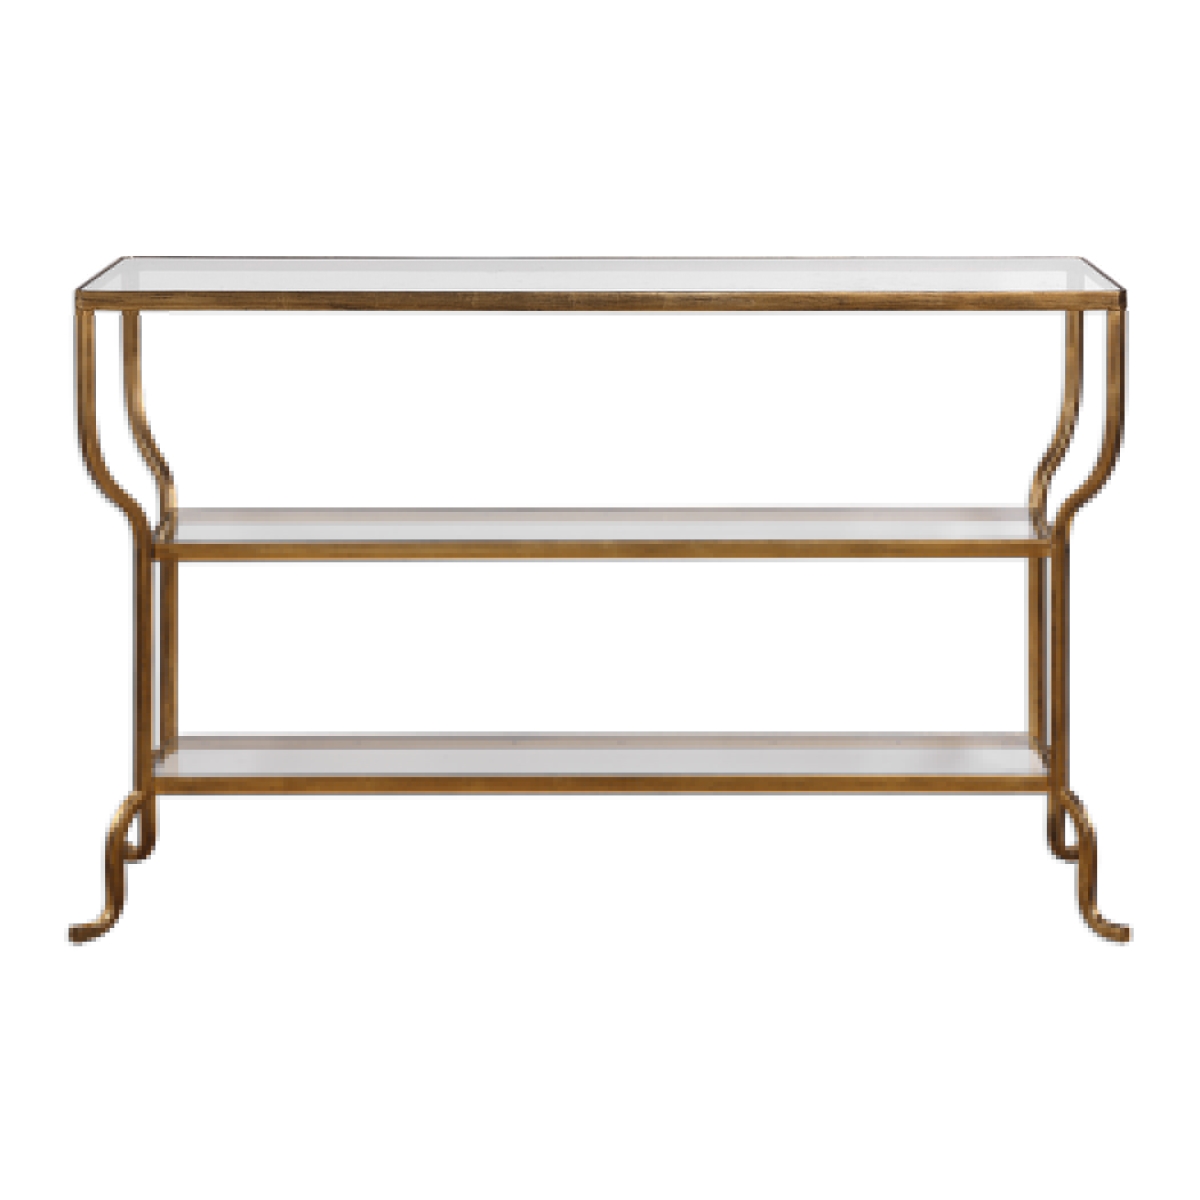 Picture of 212 Main 24668 Deline Gold Console Table